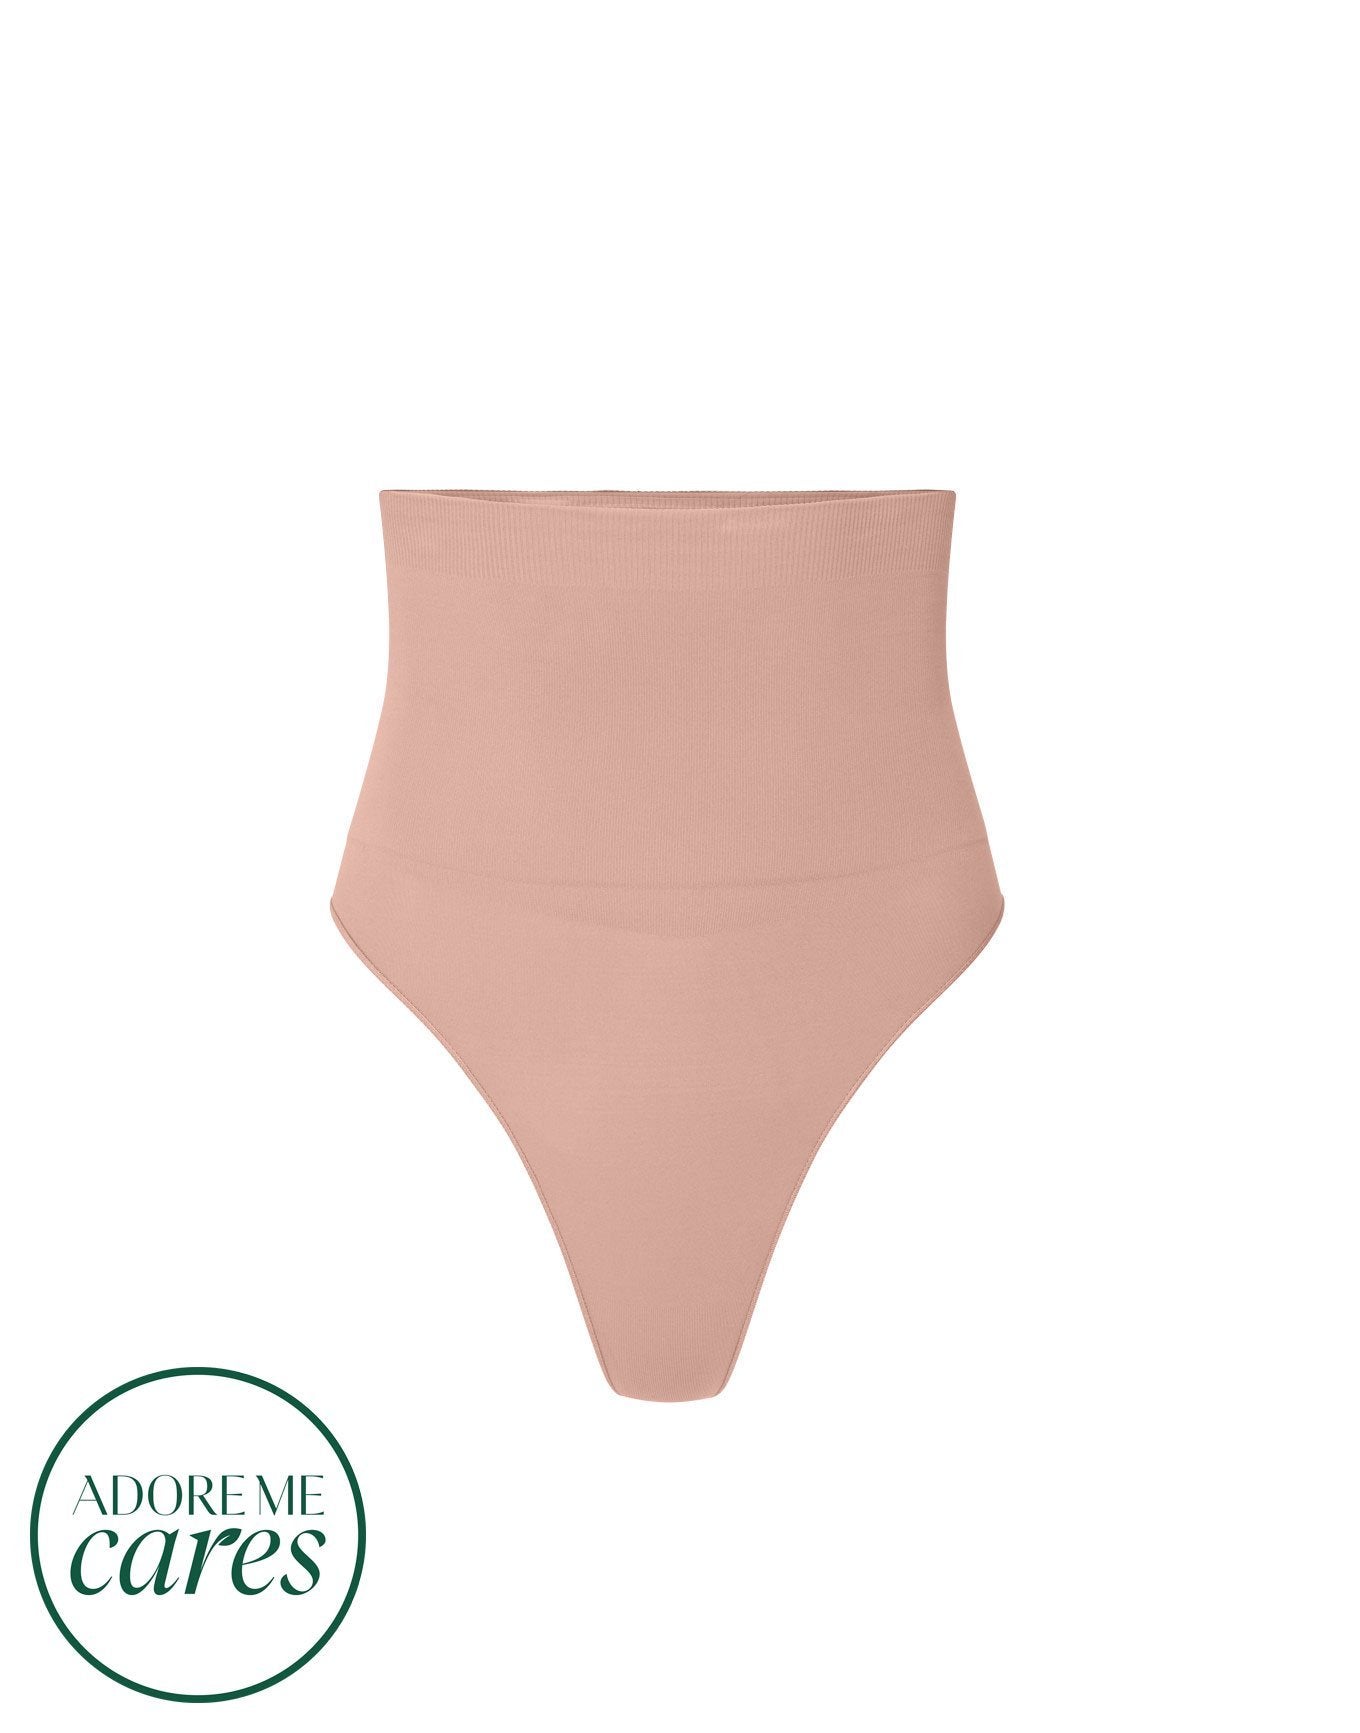 nueskin Elodie High-Compression High-Waist Thong in color Rose Cloud and shape thong